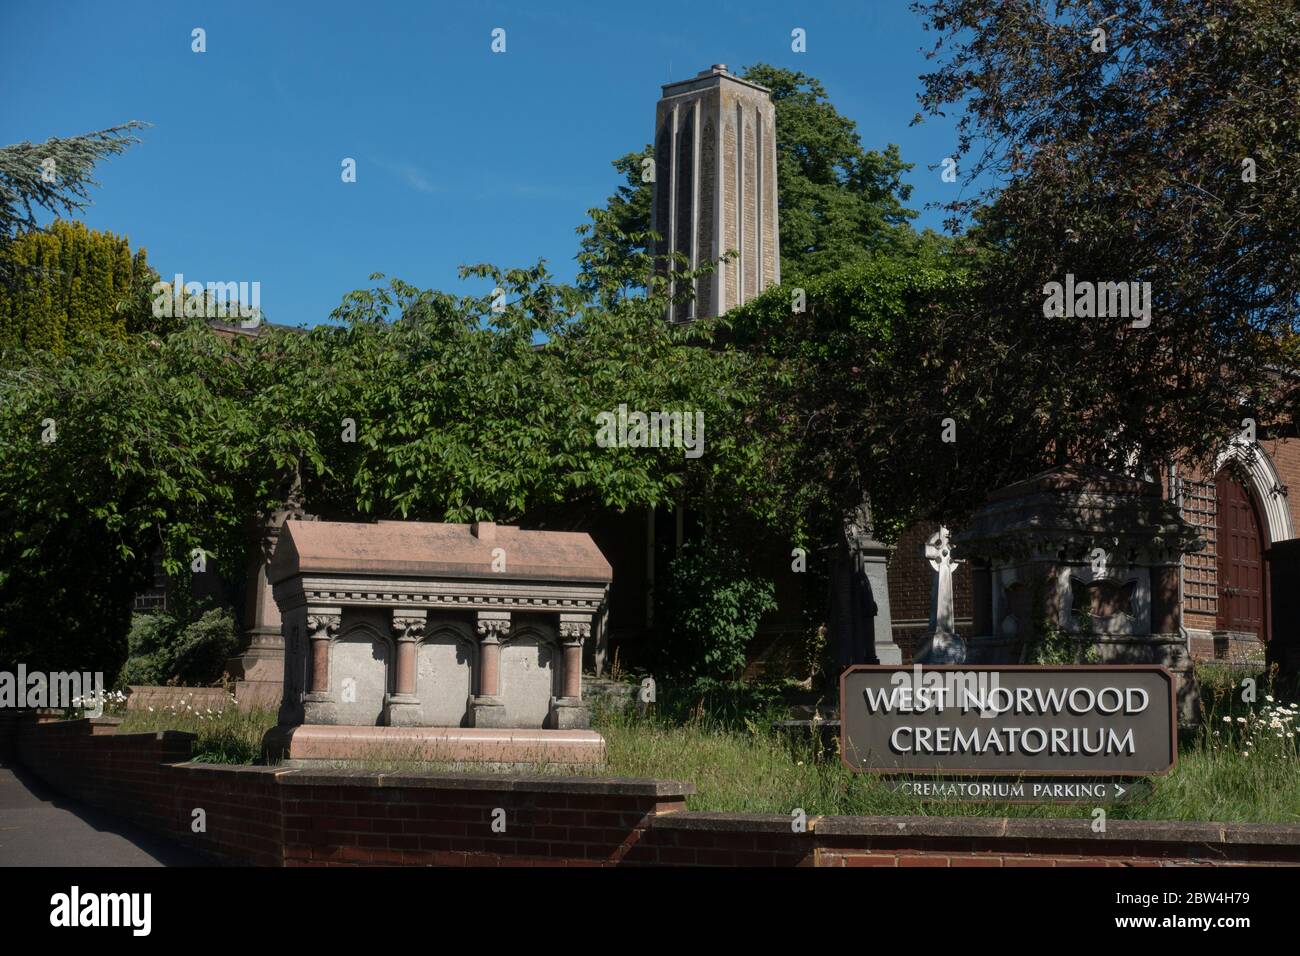 West Norwood Crematorium sign during the Coronavirus Lockdown on the 29th May 2020 in South London in the United Kingdom. Photo by Sam Mellish Stock Photo